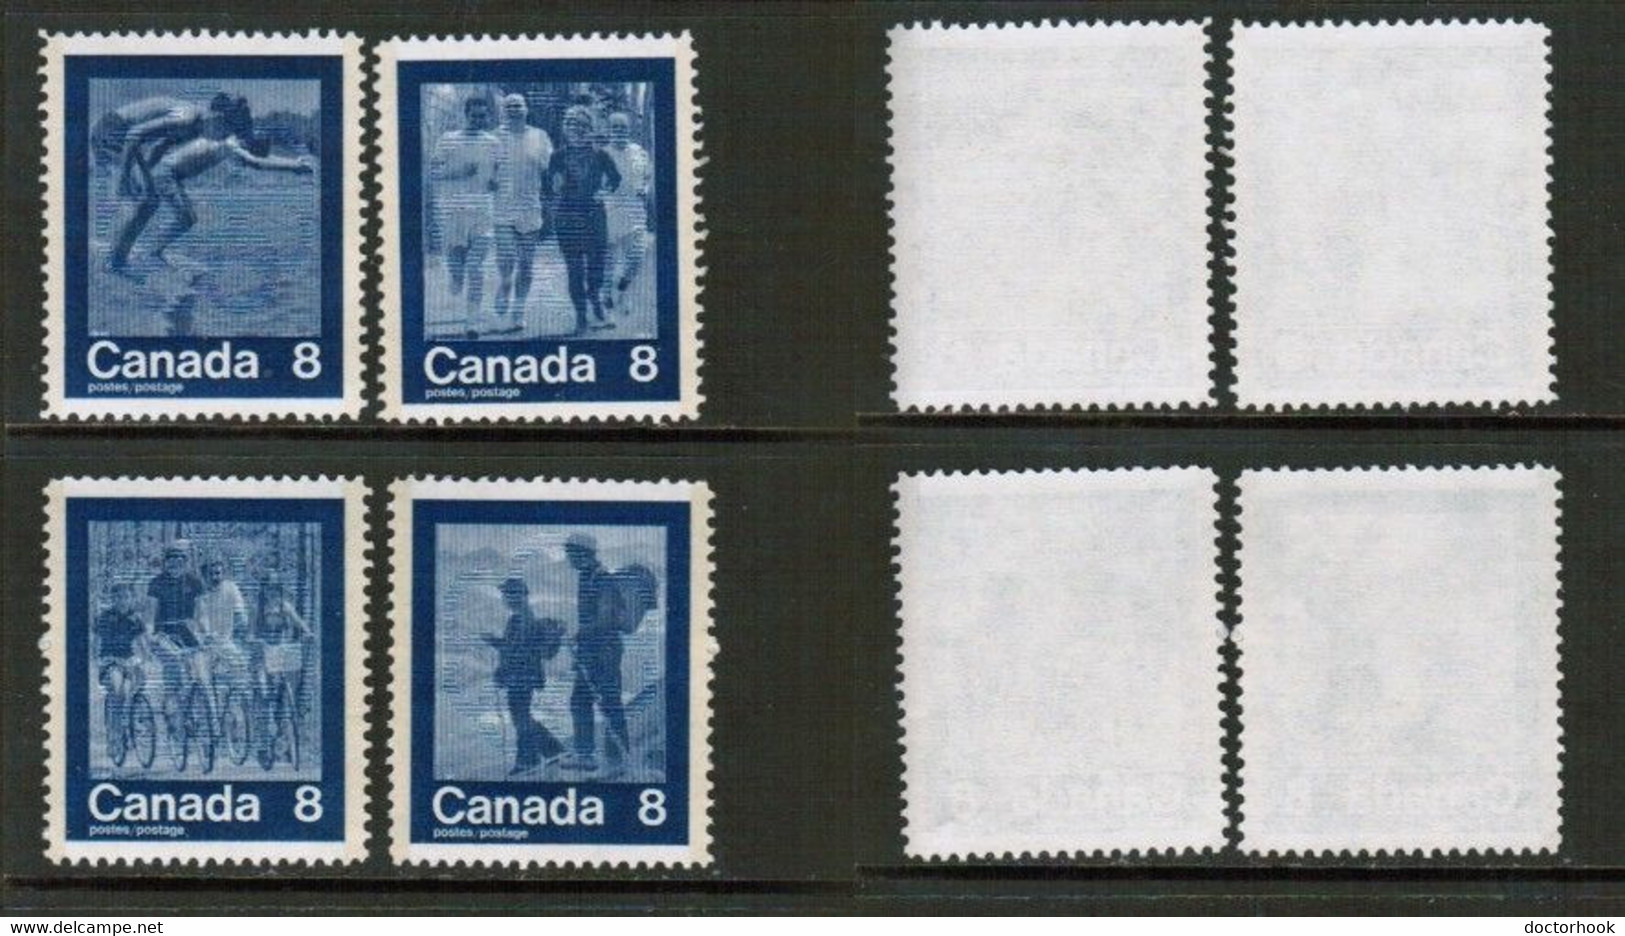 CANADA   Scott # 629-32** MINT NH (CONDITION AS PER SCAN) (WW-1-26) - Unused Stamps